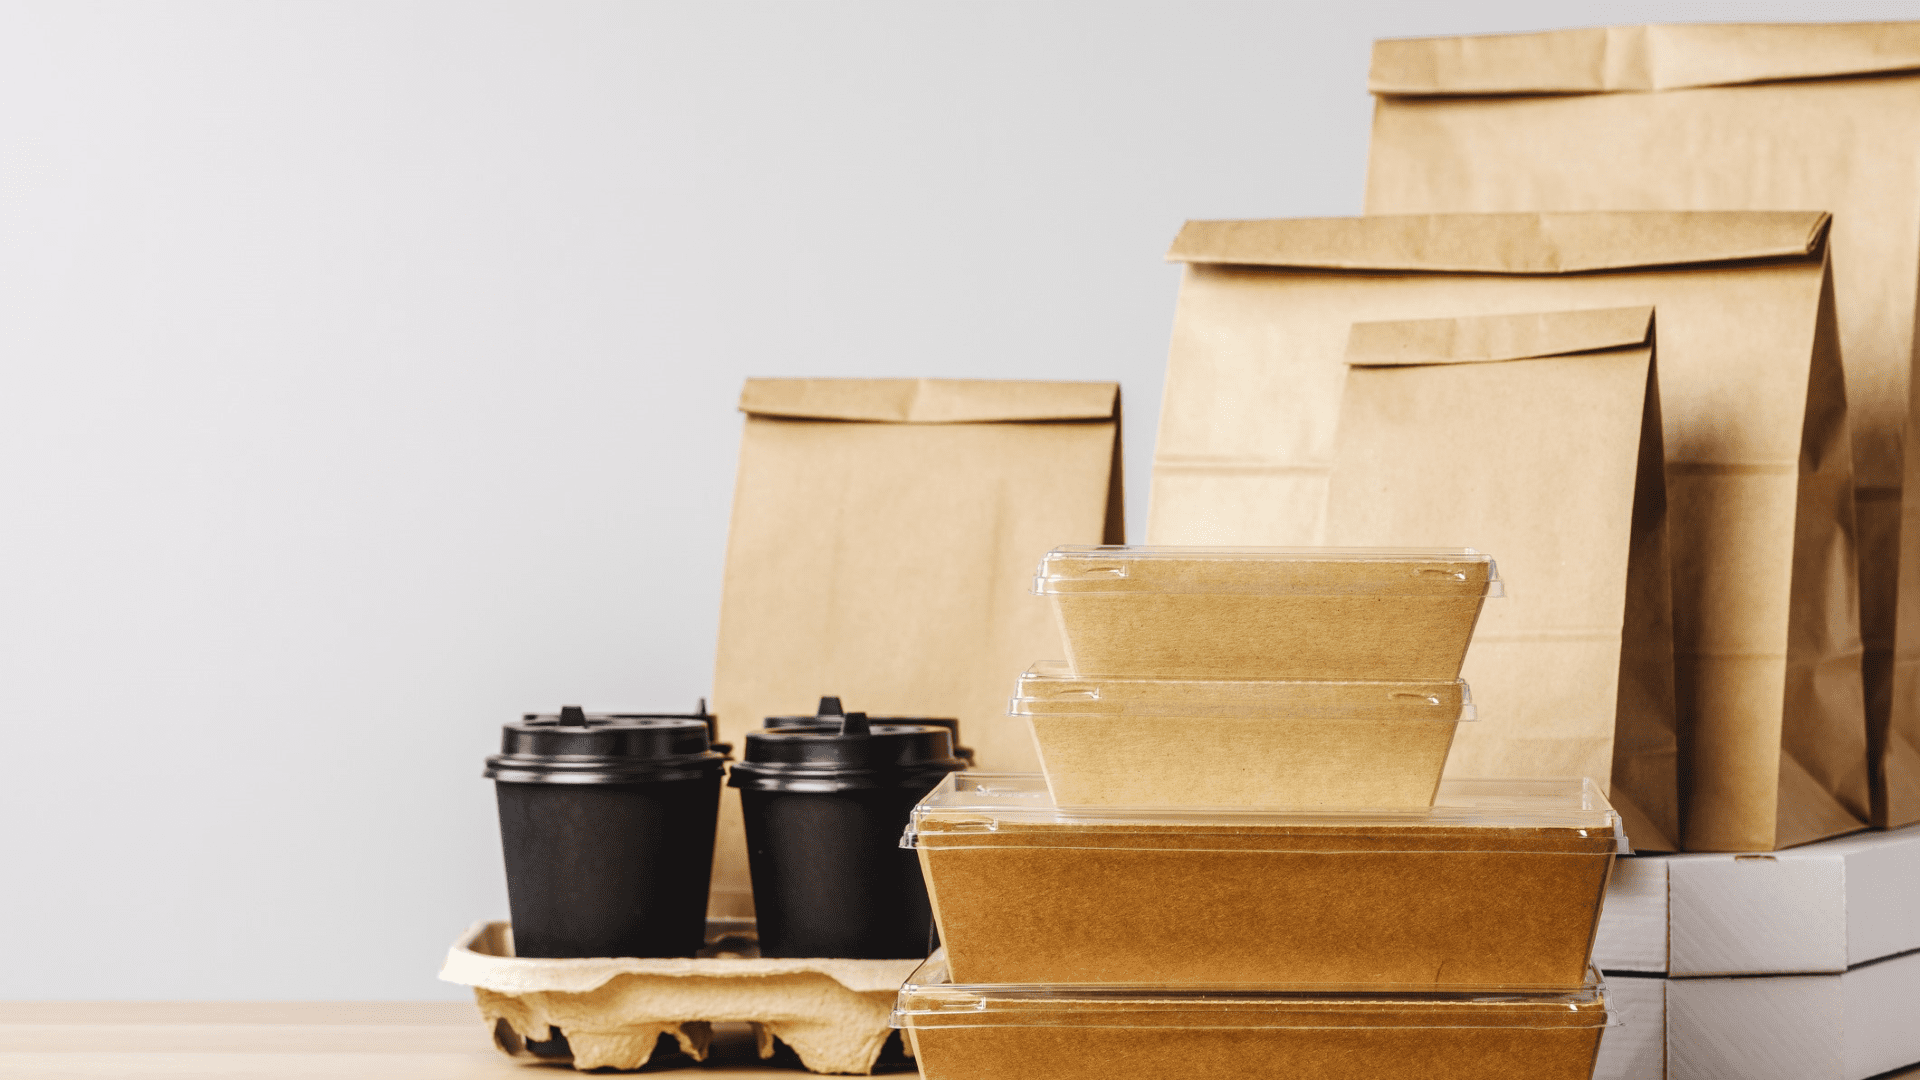 PFAS to Go: Many takeout containers and wrappers risk